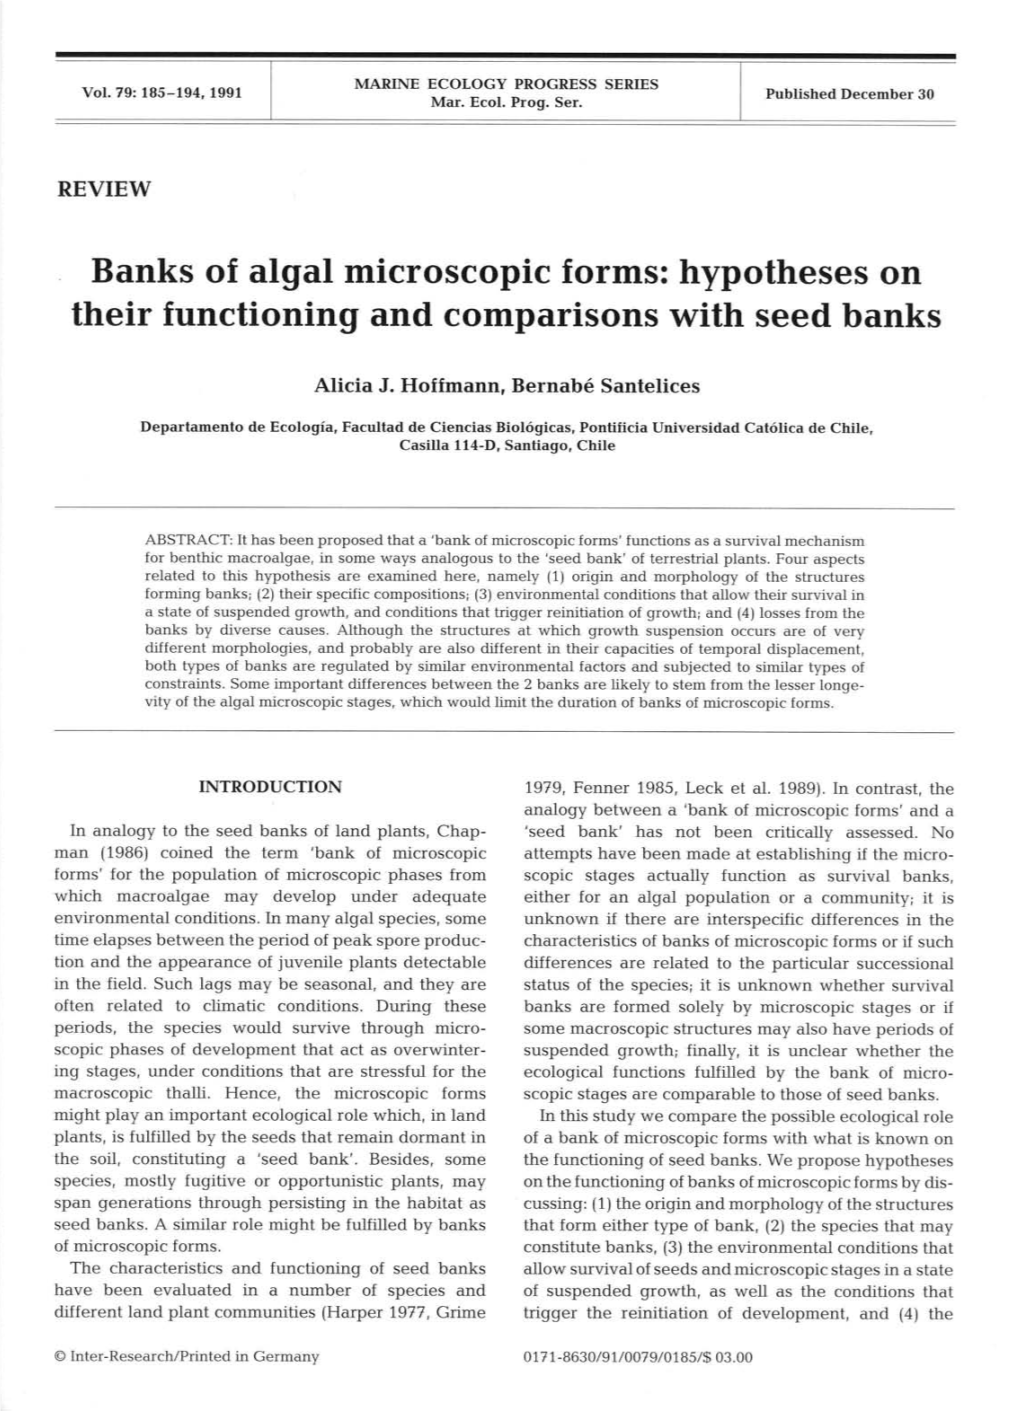 Banks of Algal Microscopic Forms: Hypotheses on Their Functioning and Comparisons with Seed Banks